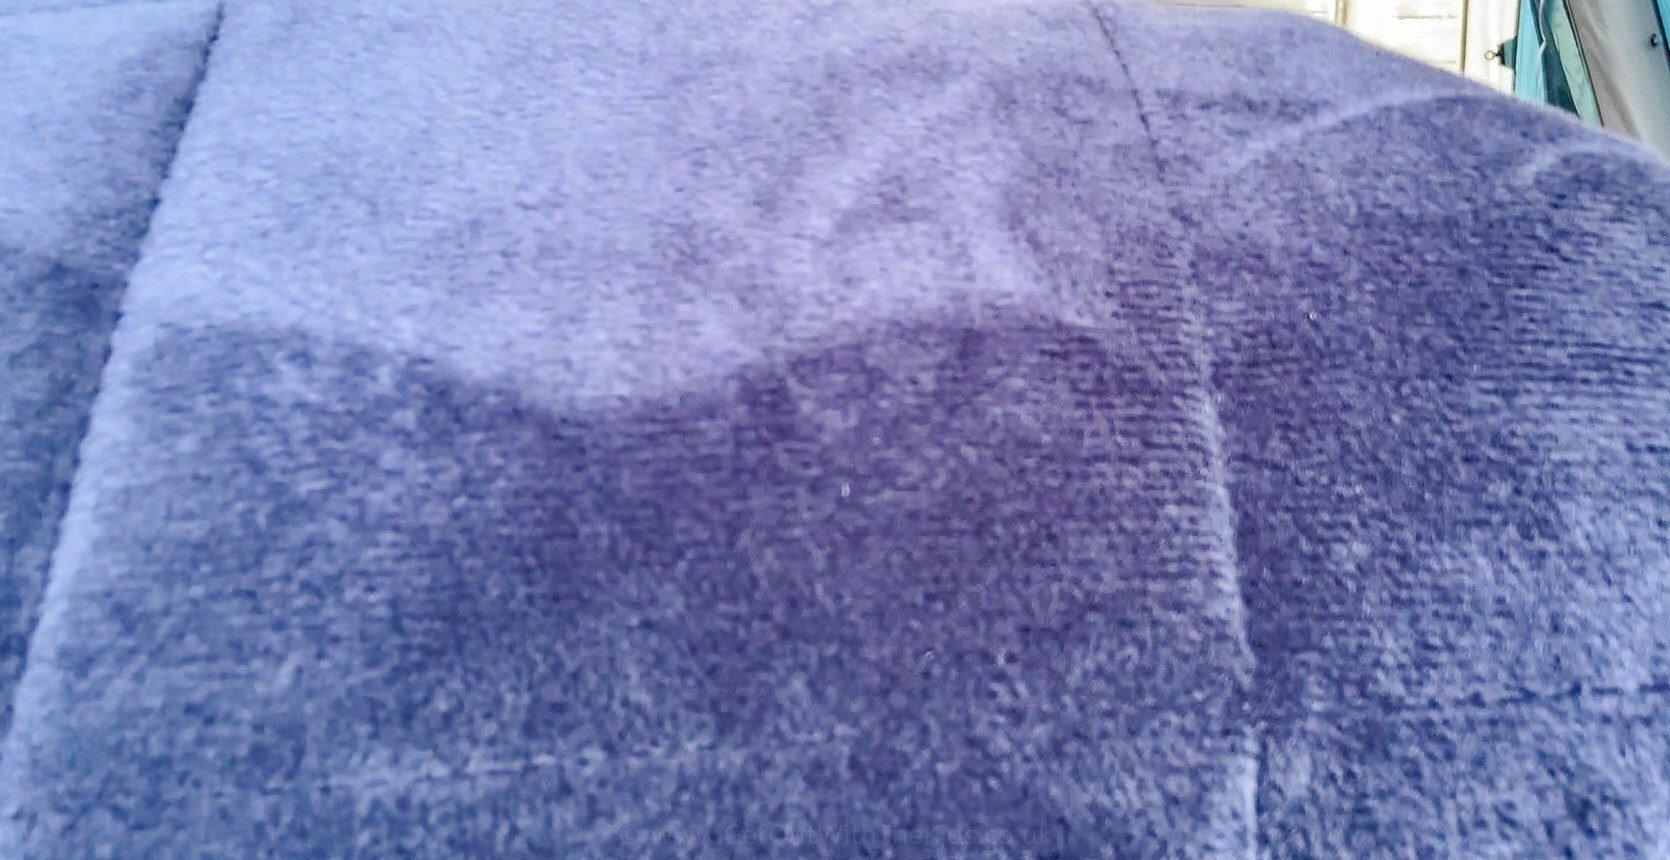 Close-up photo of the fabric top